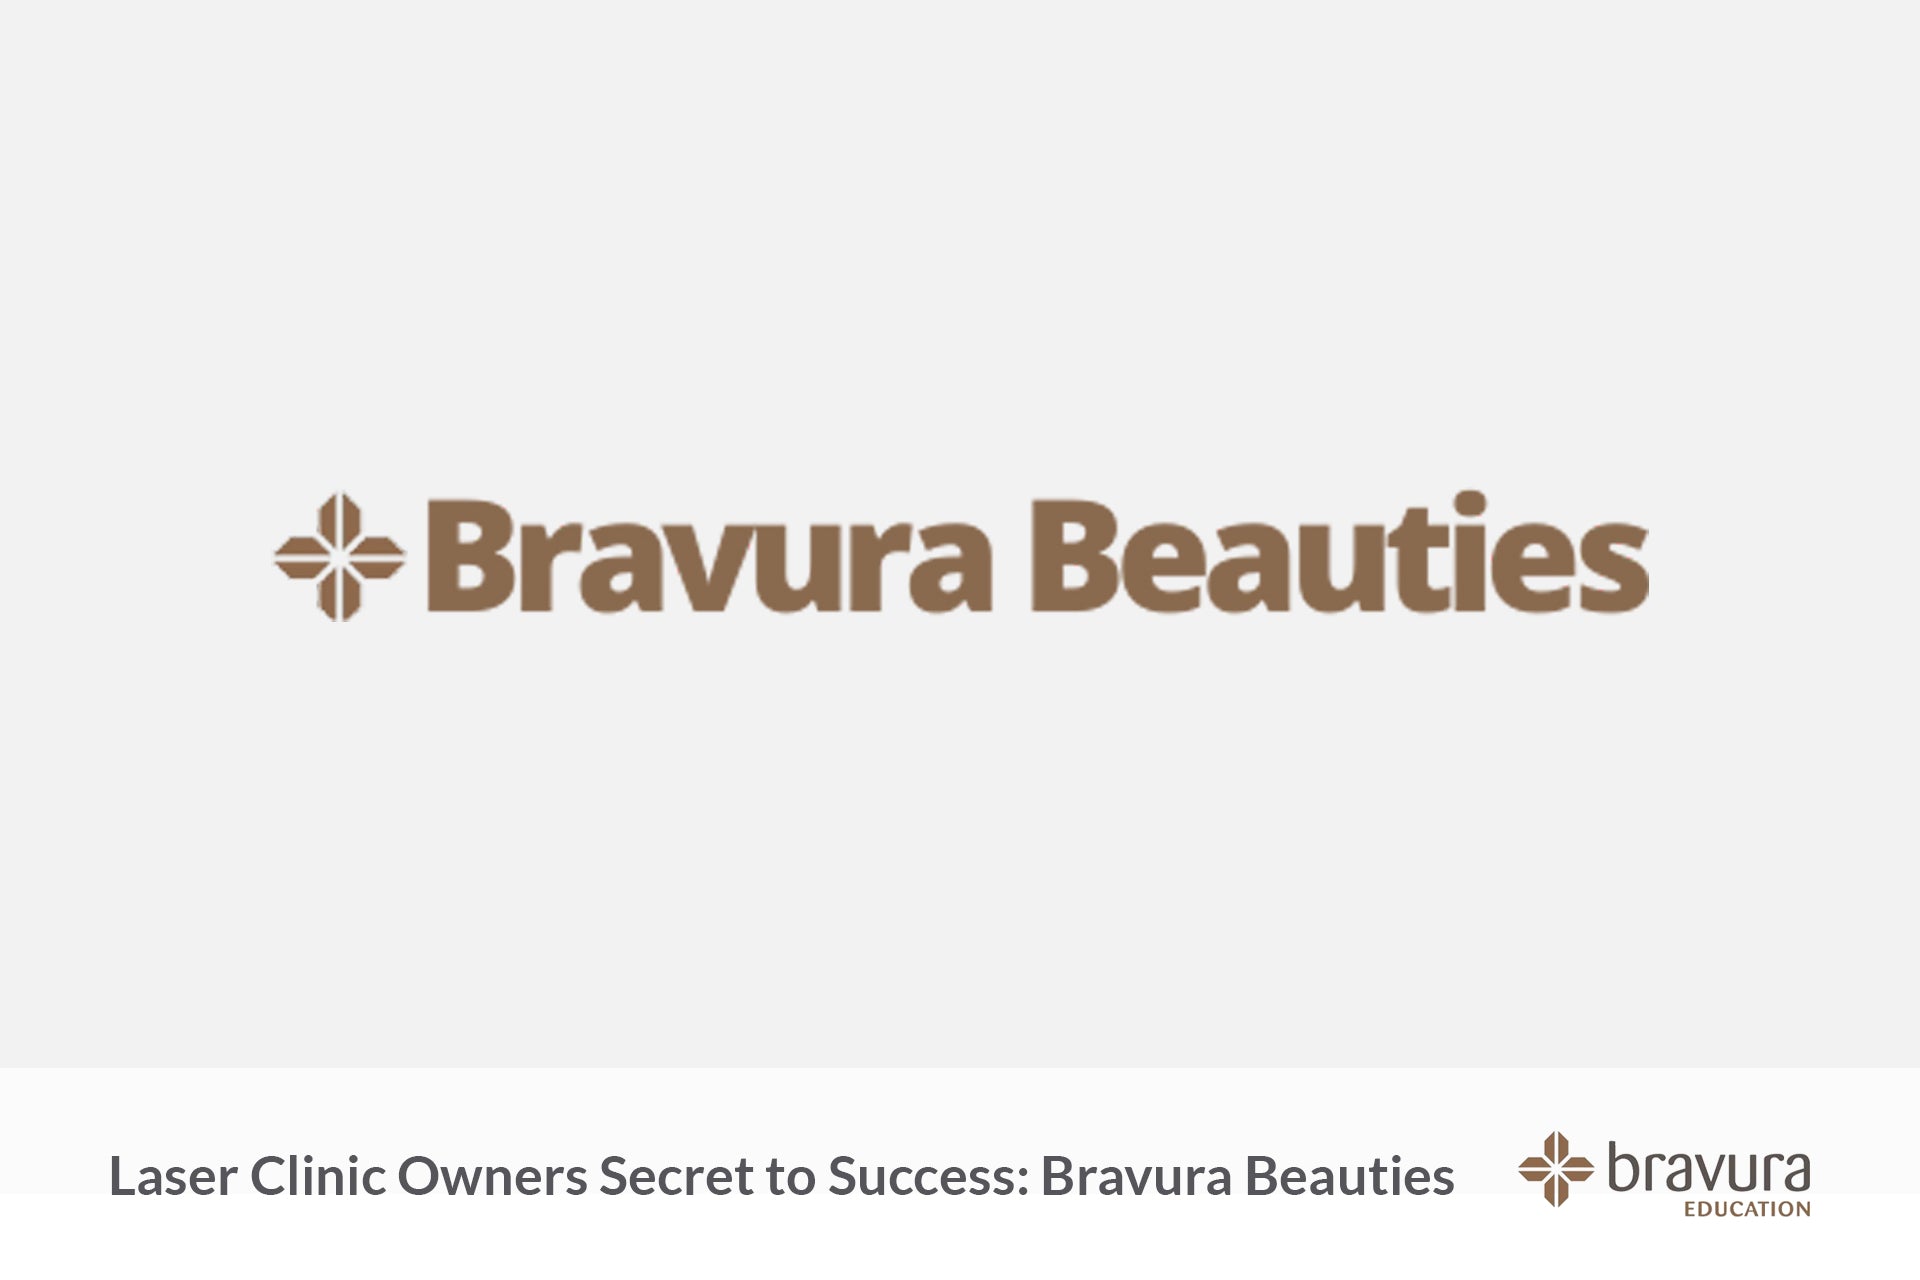 Laser Clinic Owners Secret to Success: Bravura Beauties